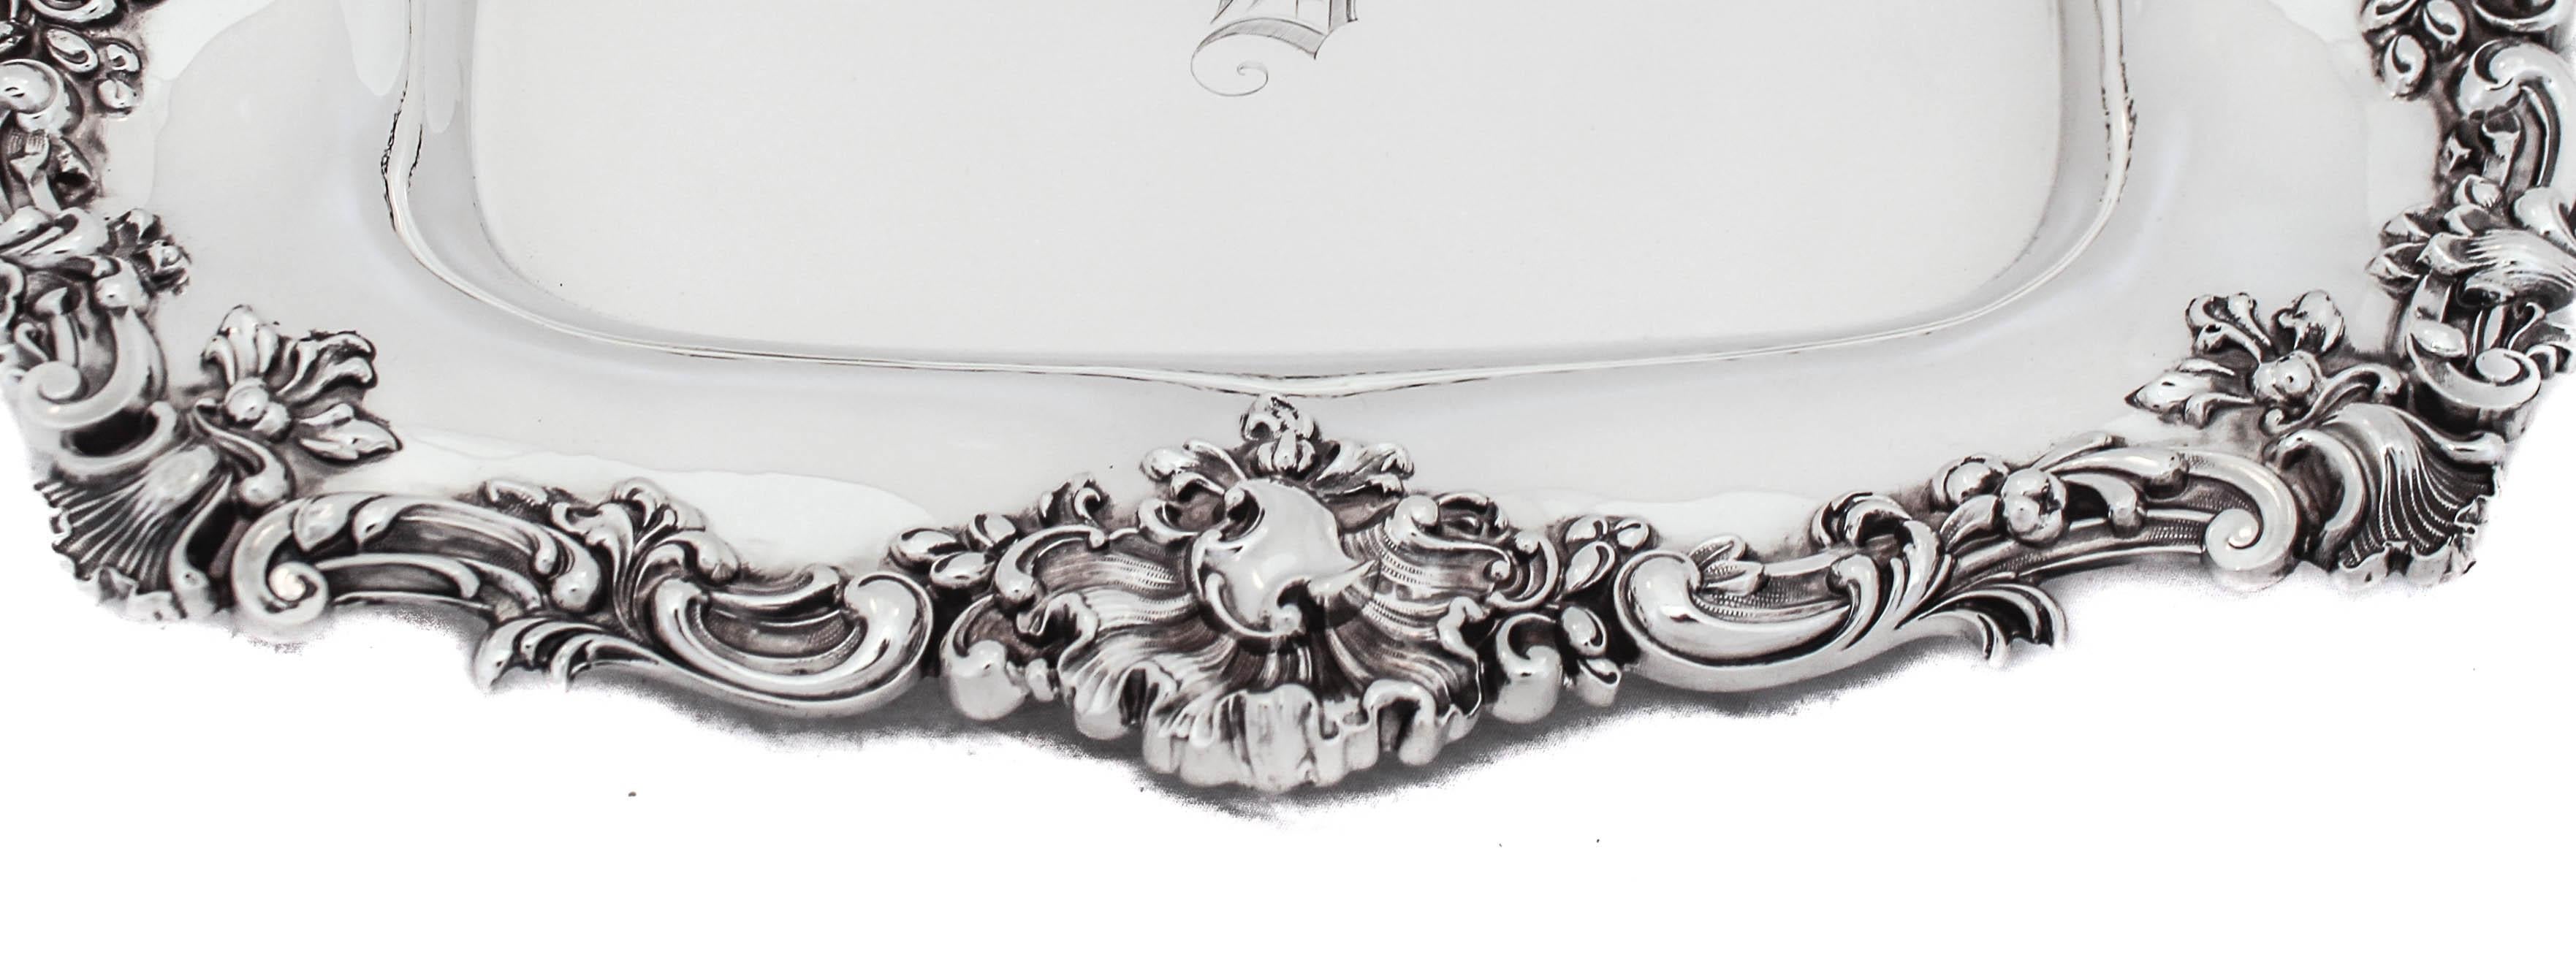 American Sterling Silver Rocco Platter